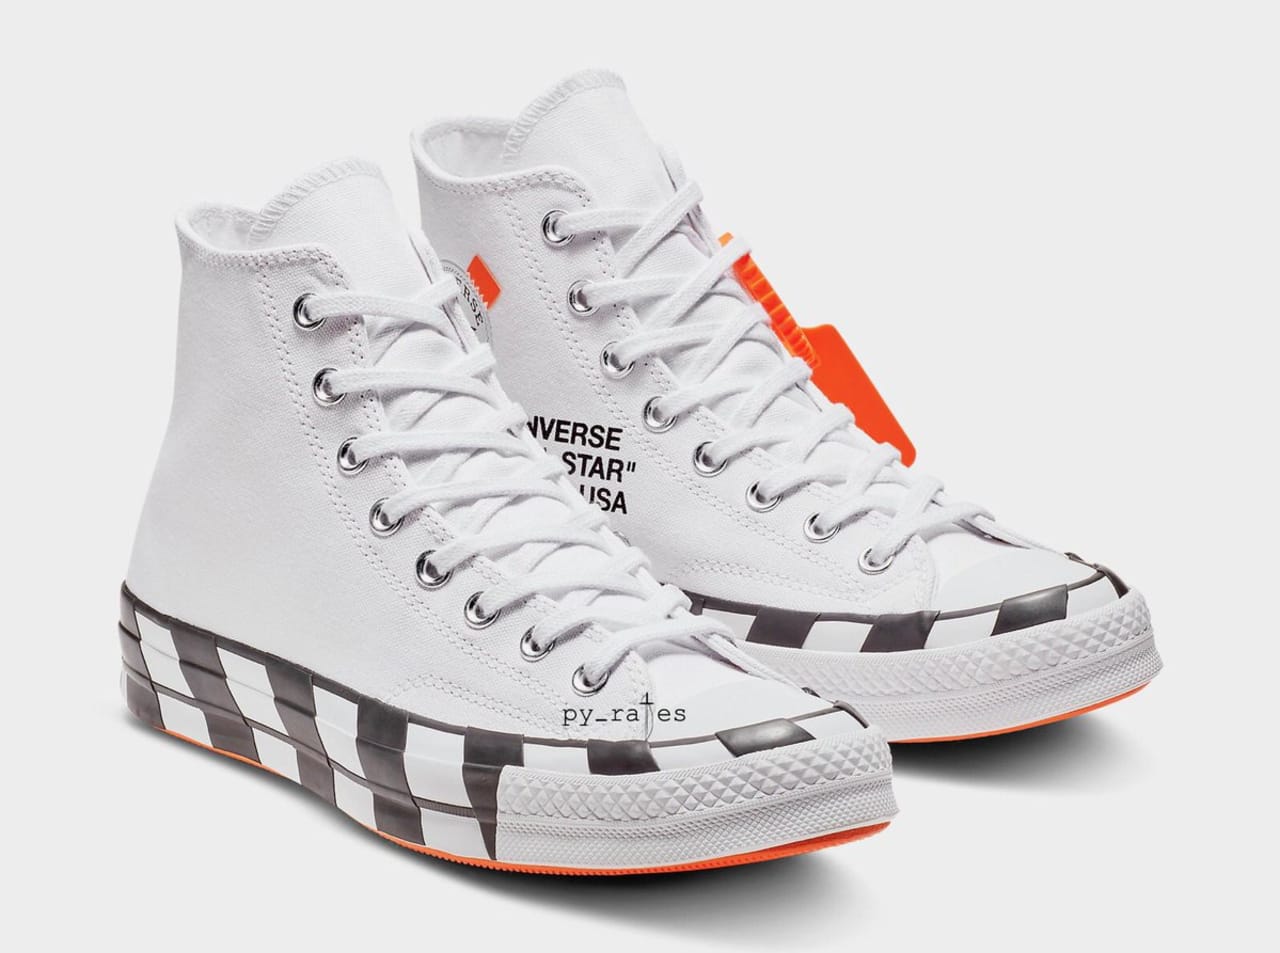 converse chuck taylor off white retail price